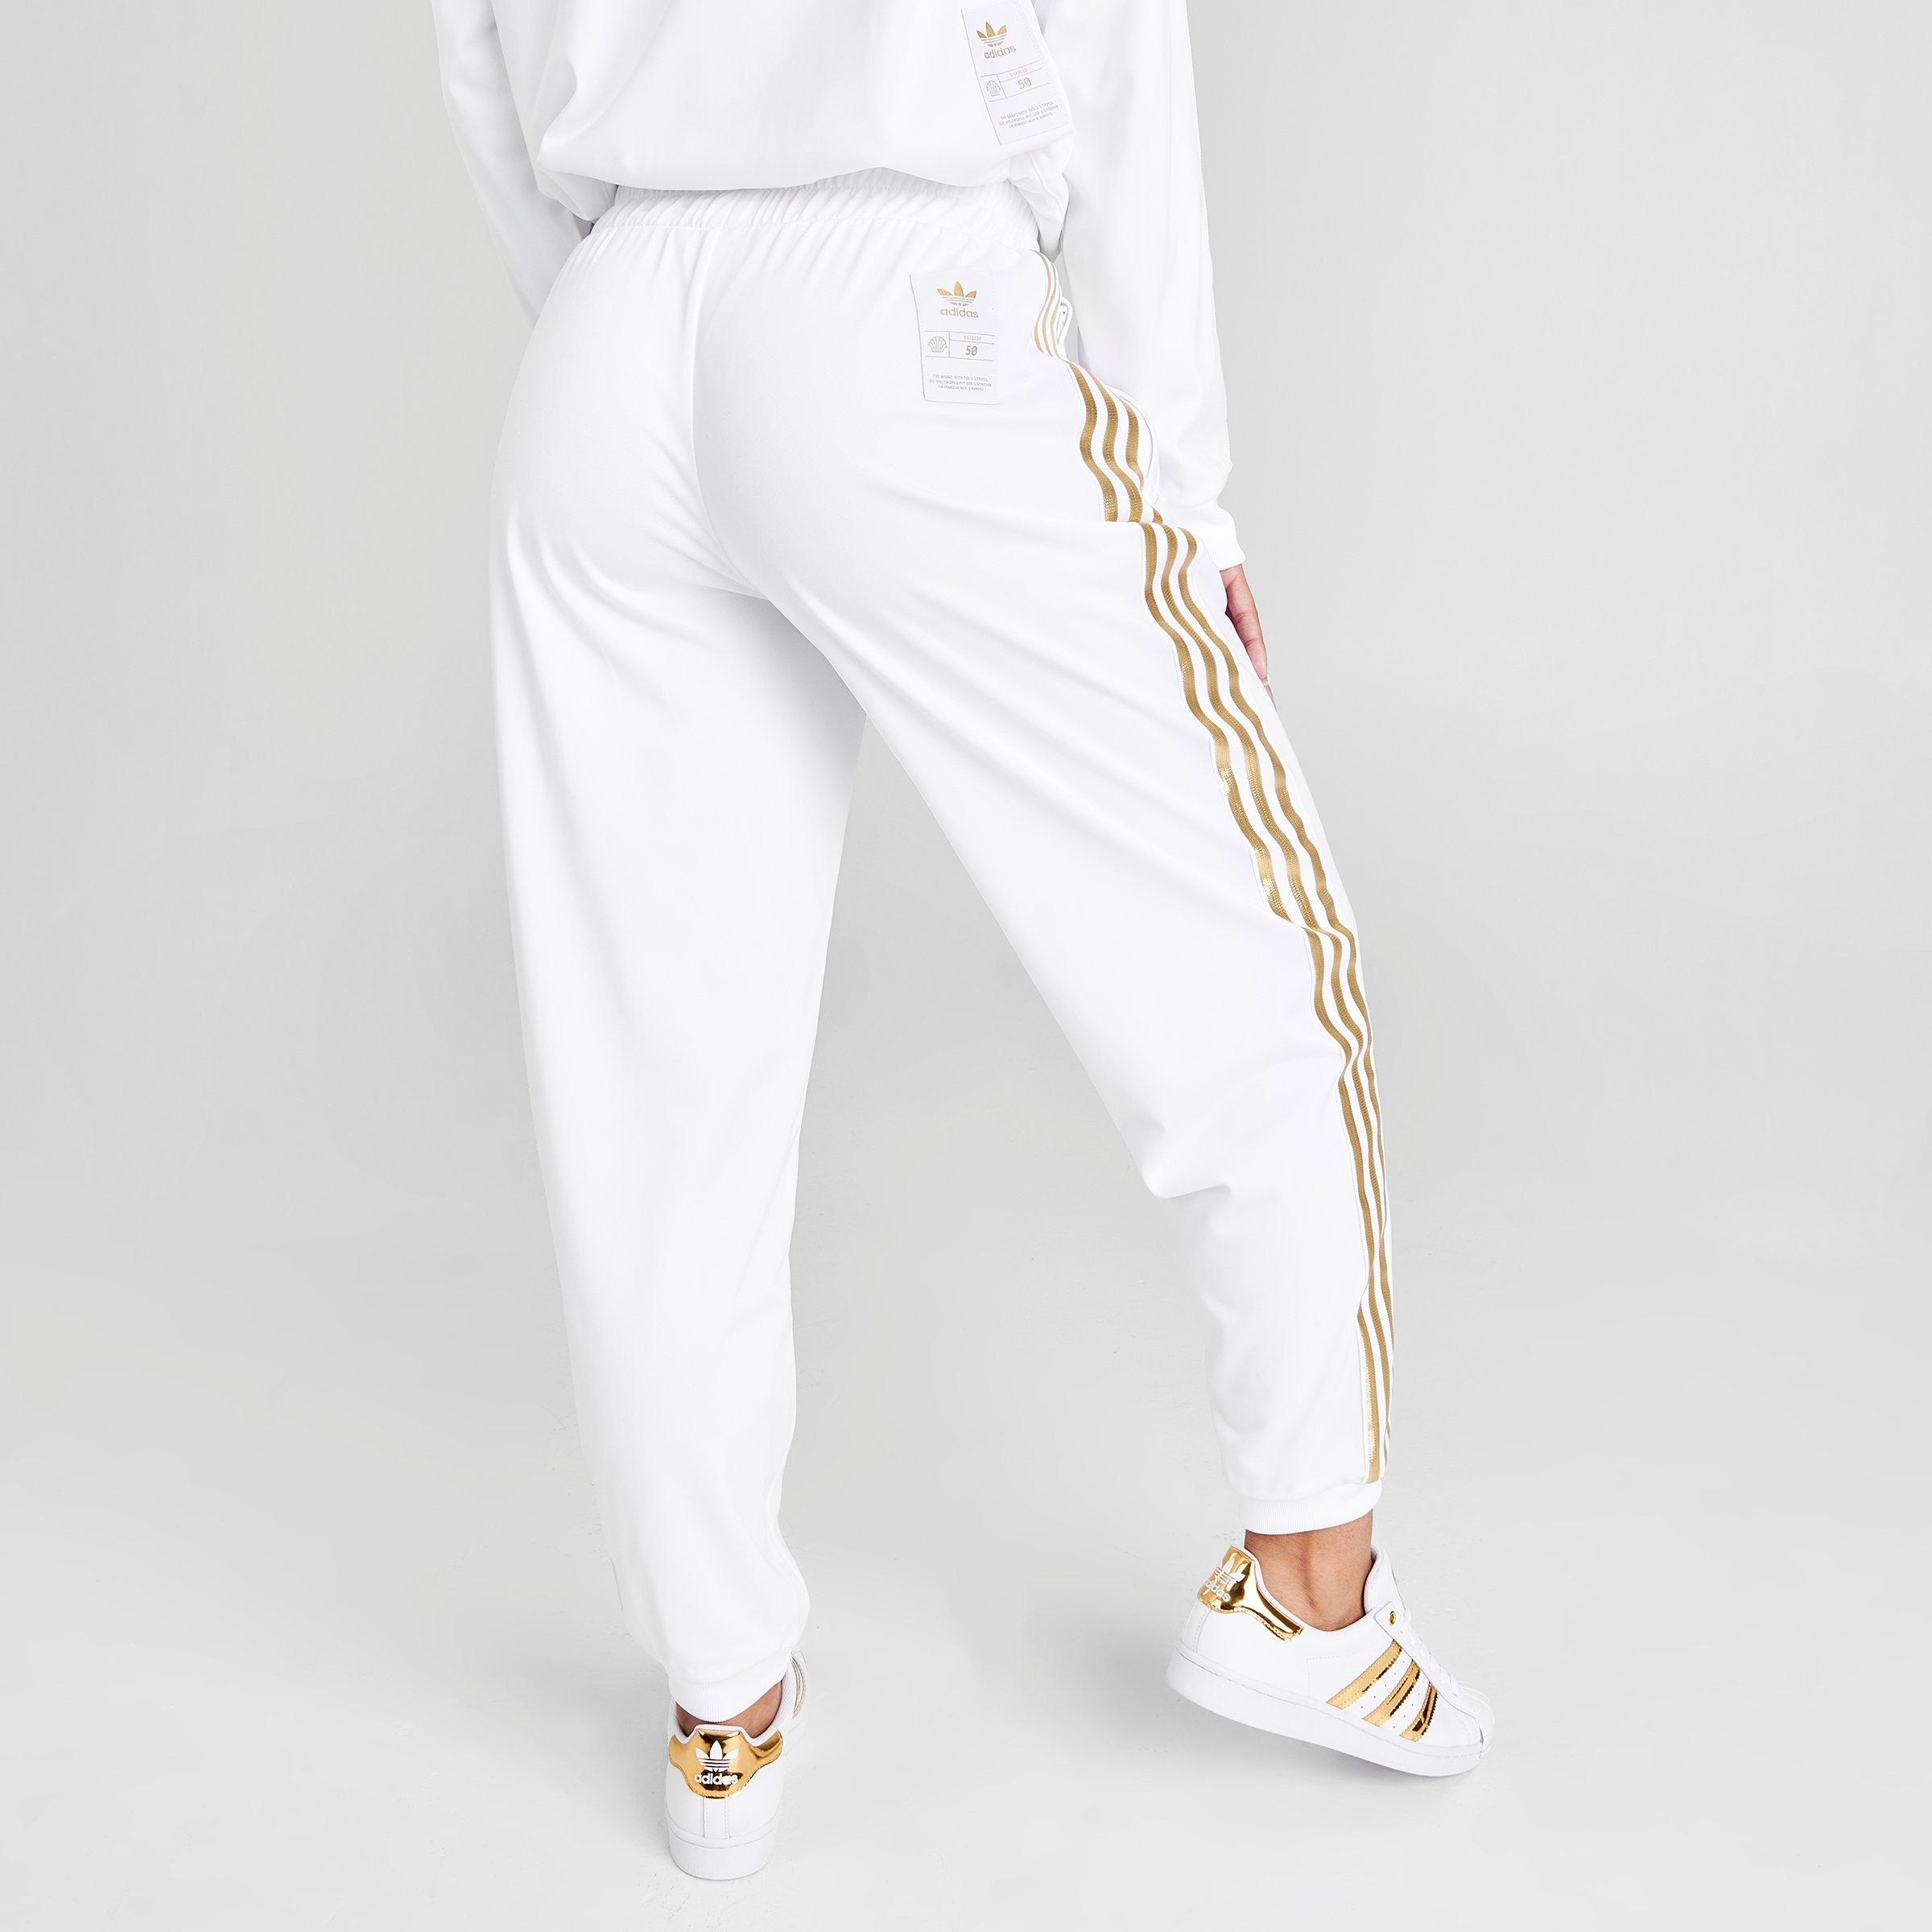 white and gold adidas outfit